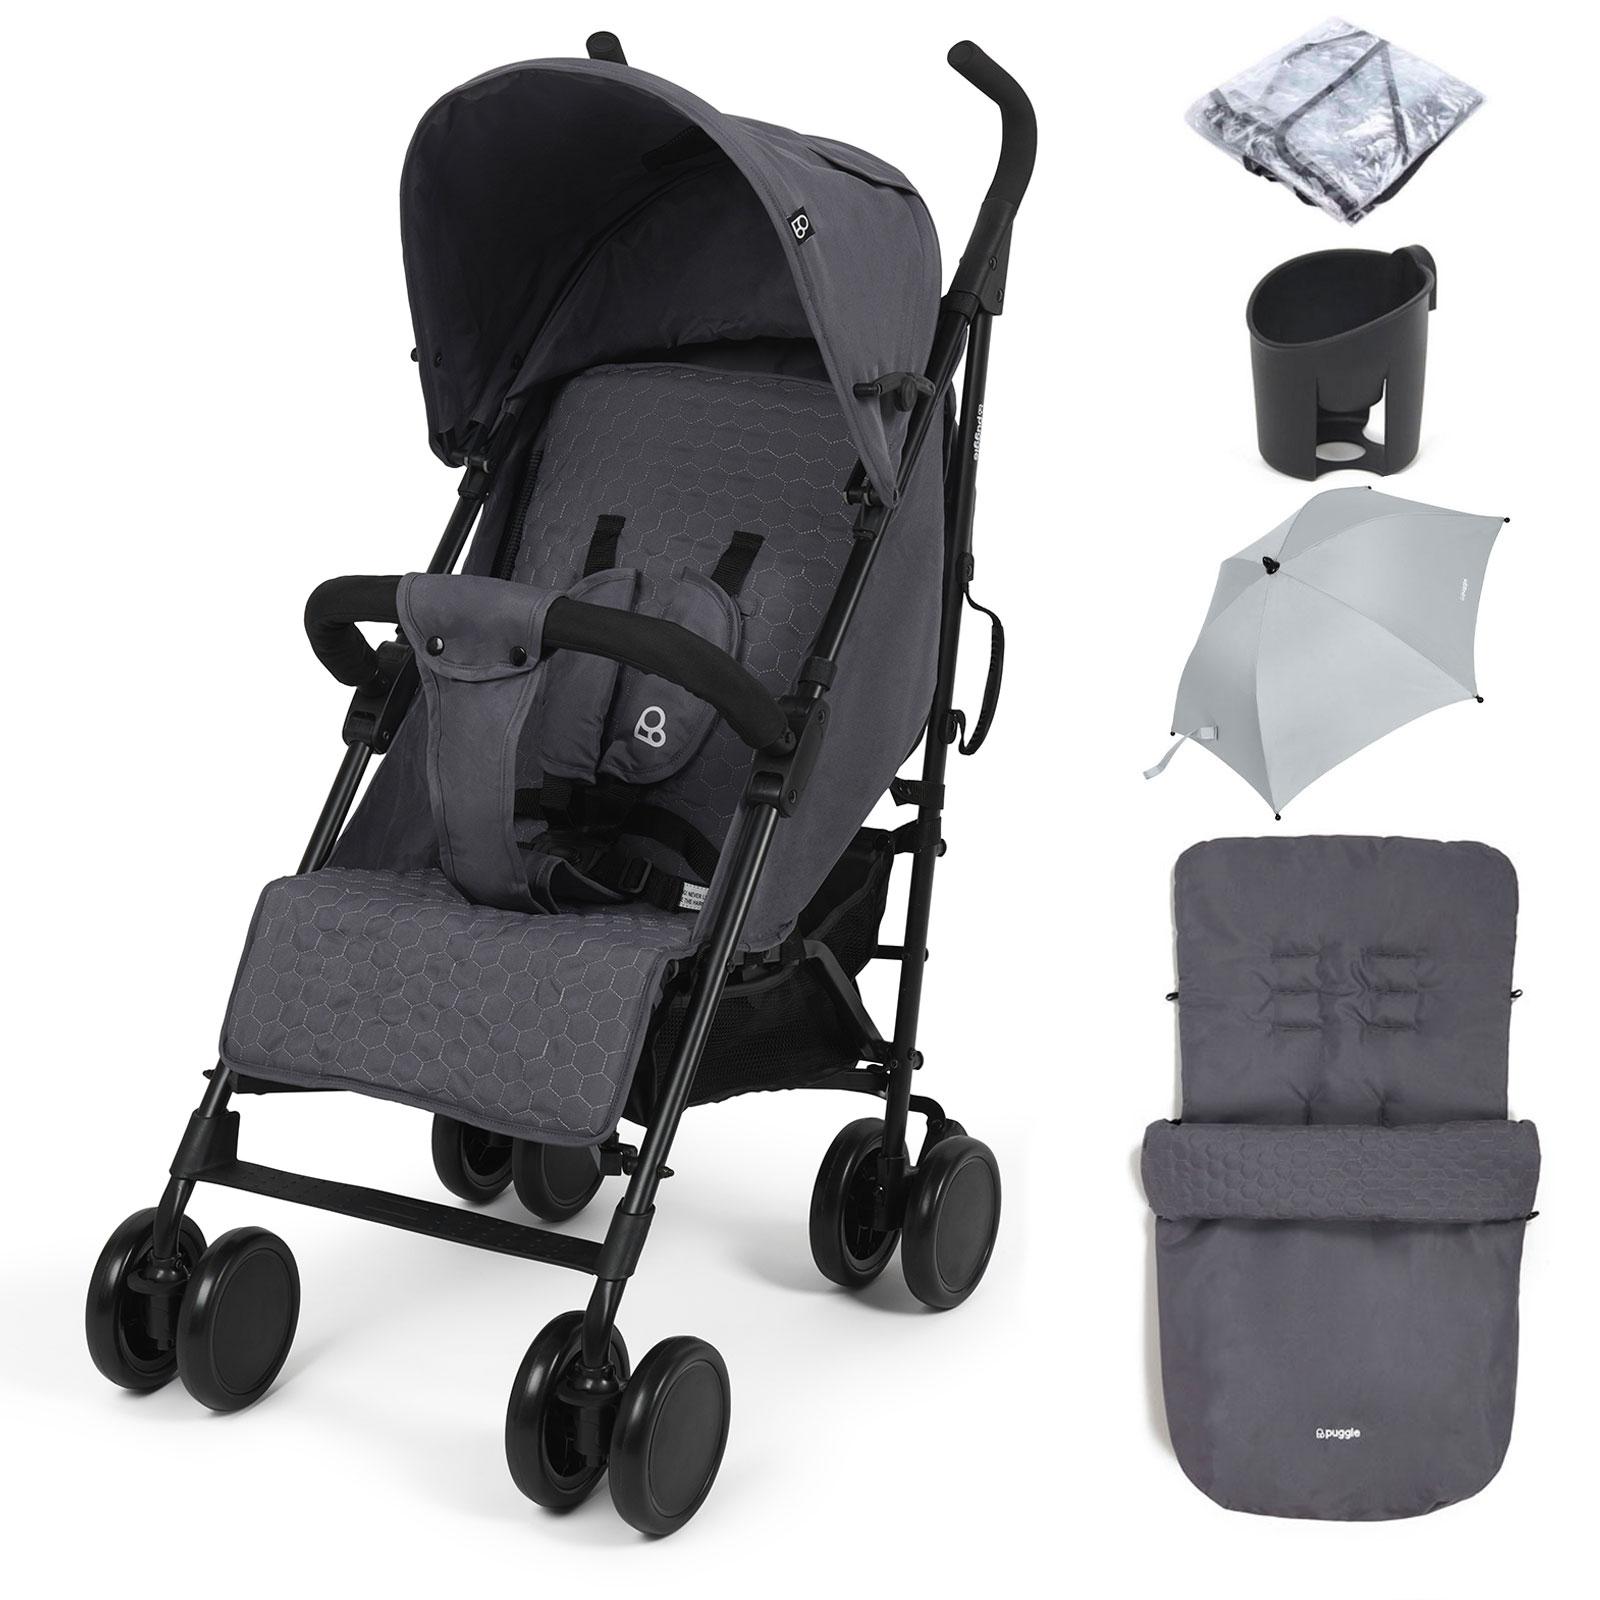 Puggle Litemax Pushchair Stroller with Raincover, Cupholder, Universal Footmuff and Parasol - Slate Grey